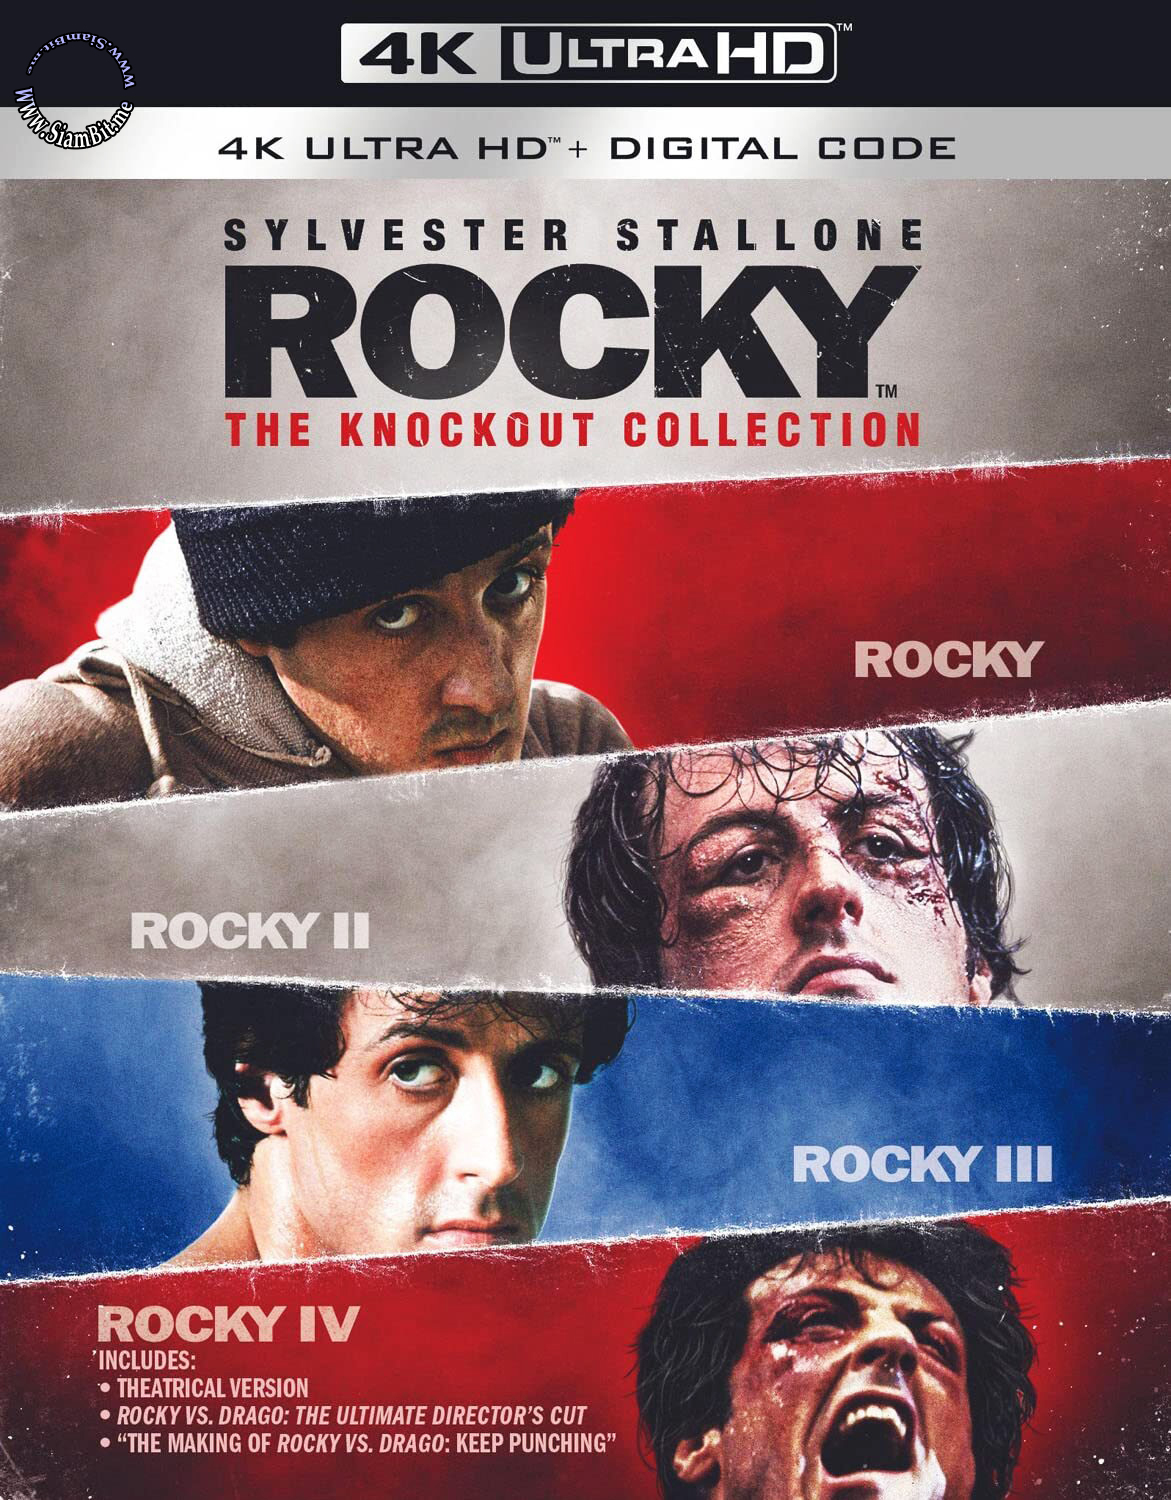 Rocky - The Knockout Collection (1976-1985) รวม 4 เรื่อง